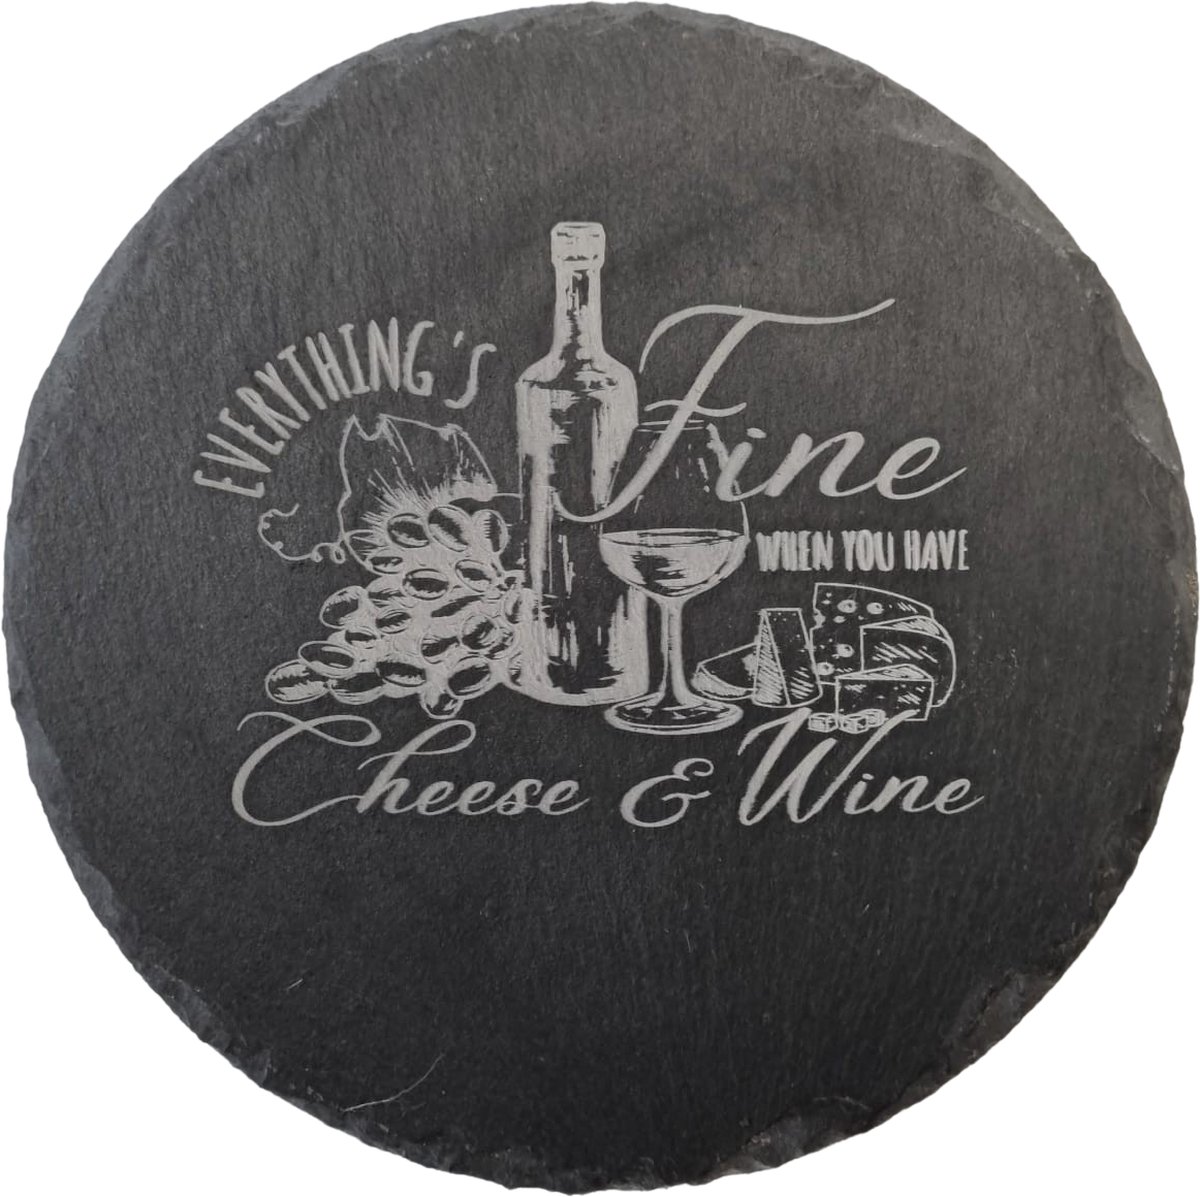 LBM - Everything is fine when you have cheese & wine serveerplateau - leisteen - 20 cm